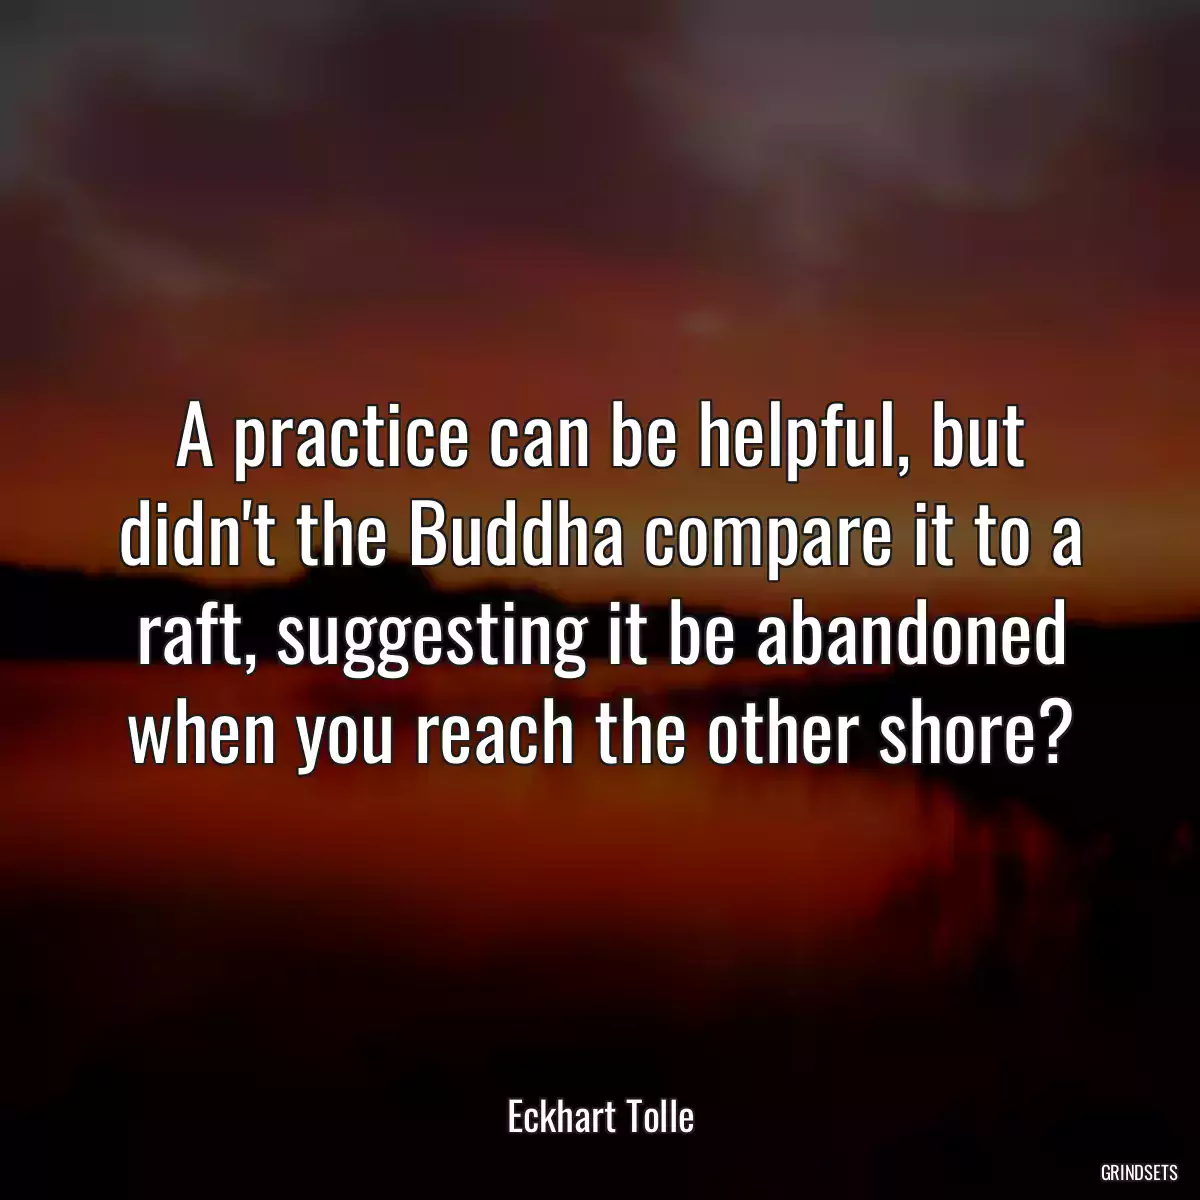 A practice can be helpful, but didn\'t the Buddha compare it to a raft, suggesting it be abandoned when you reach the other shore?